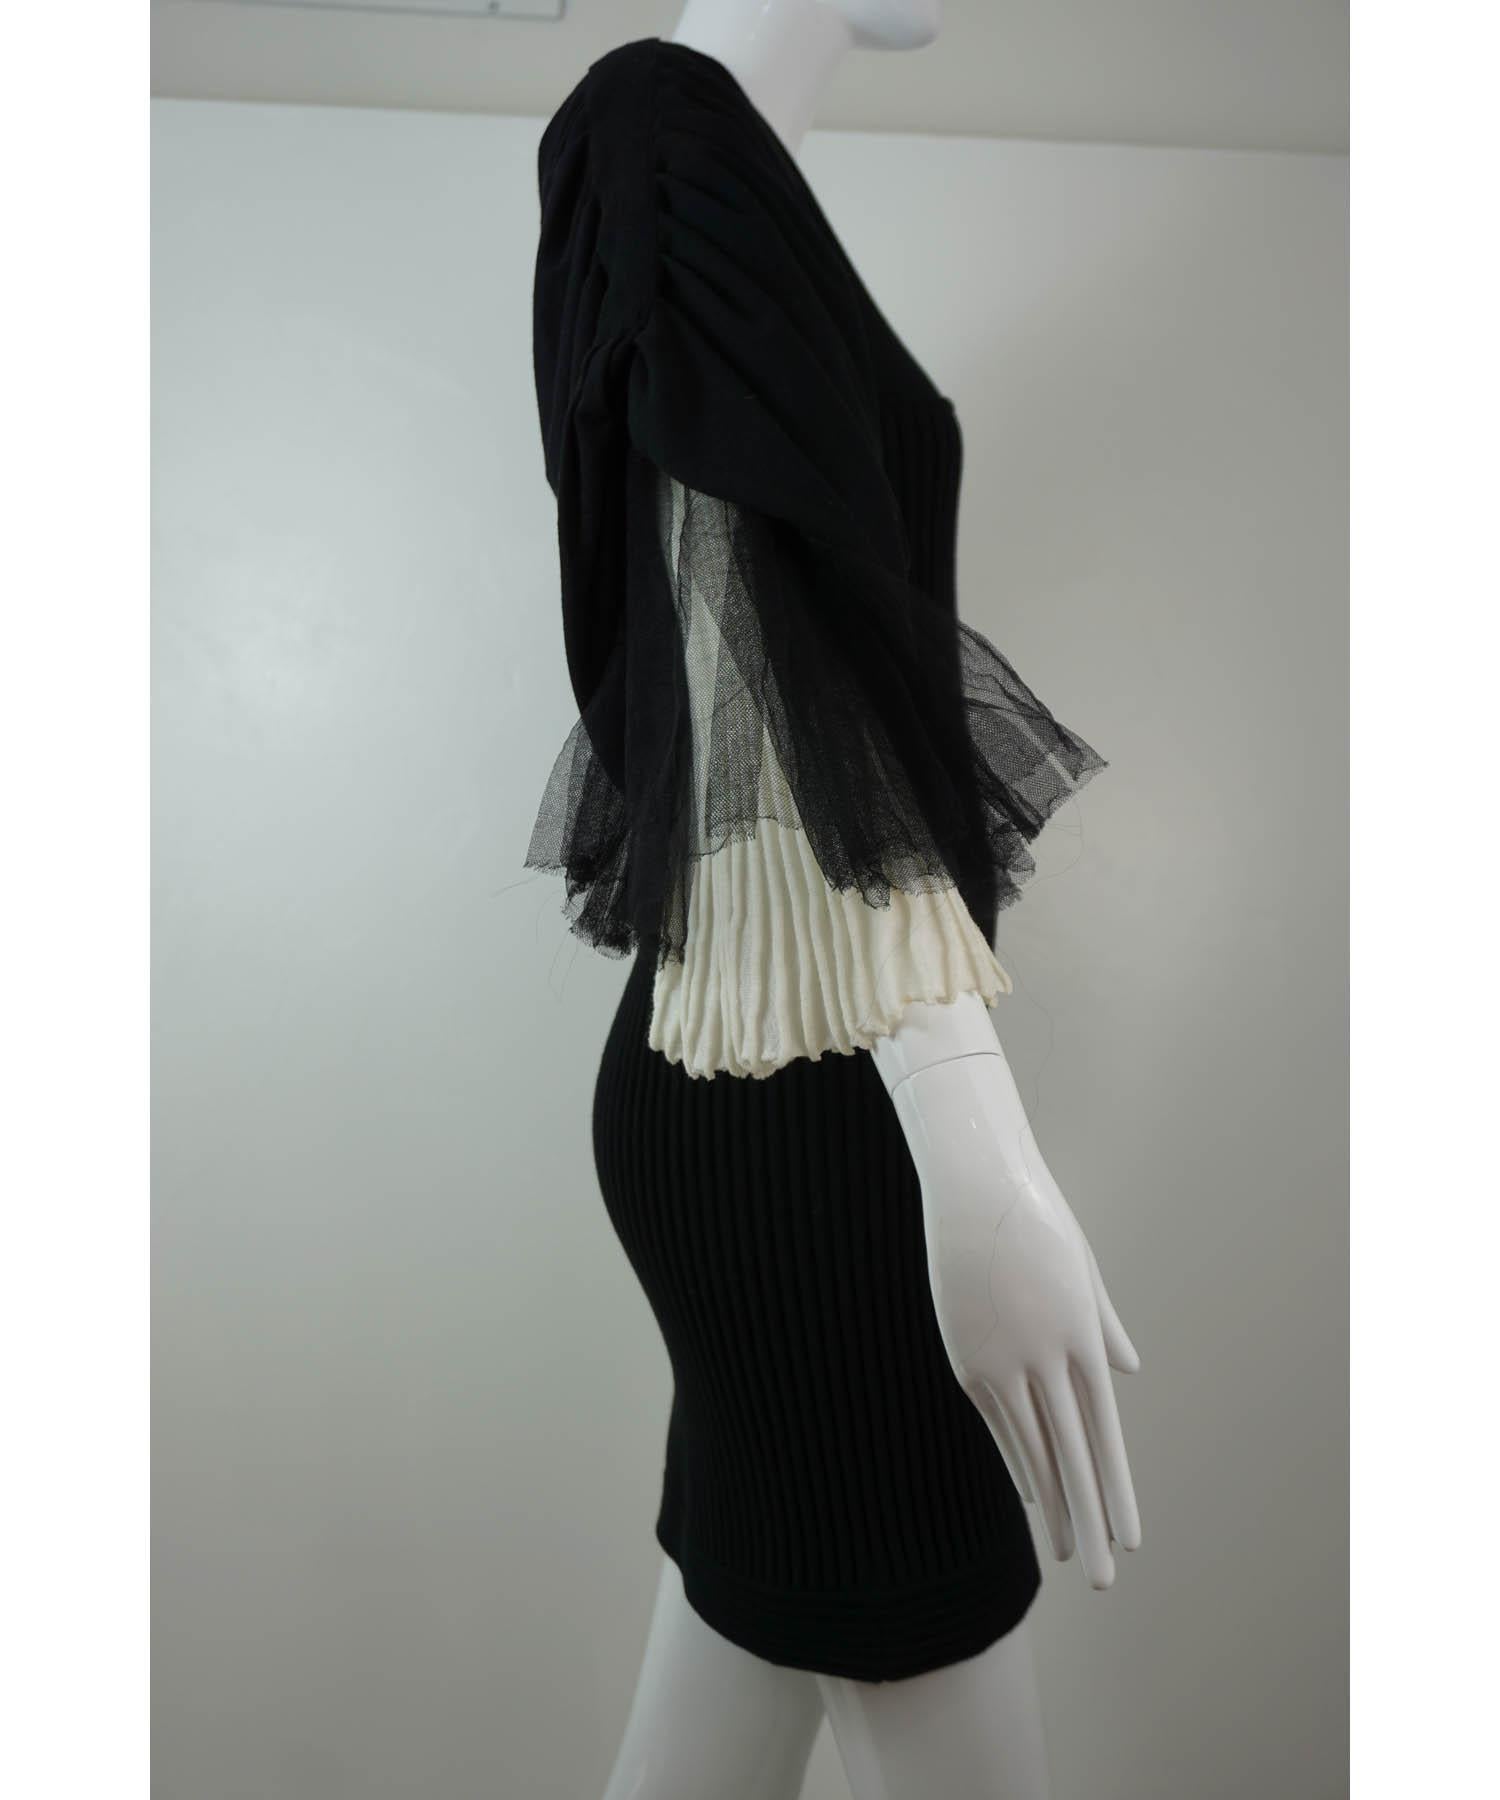 Chanel 2009 Puff Sleeve Knit Dress In Excellent Condition For Sale In Carmel, CA